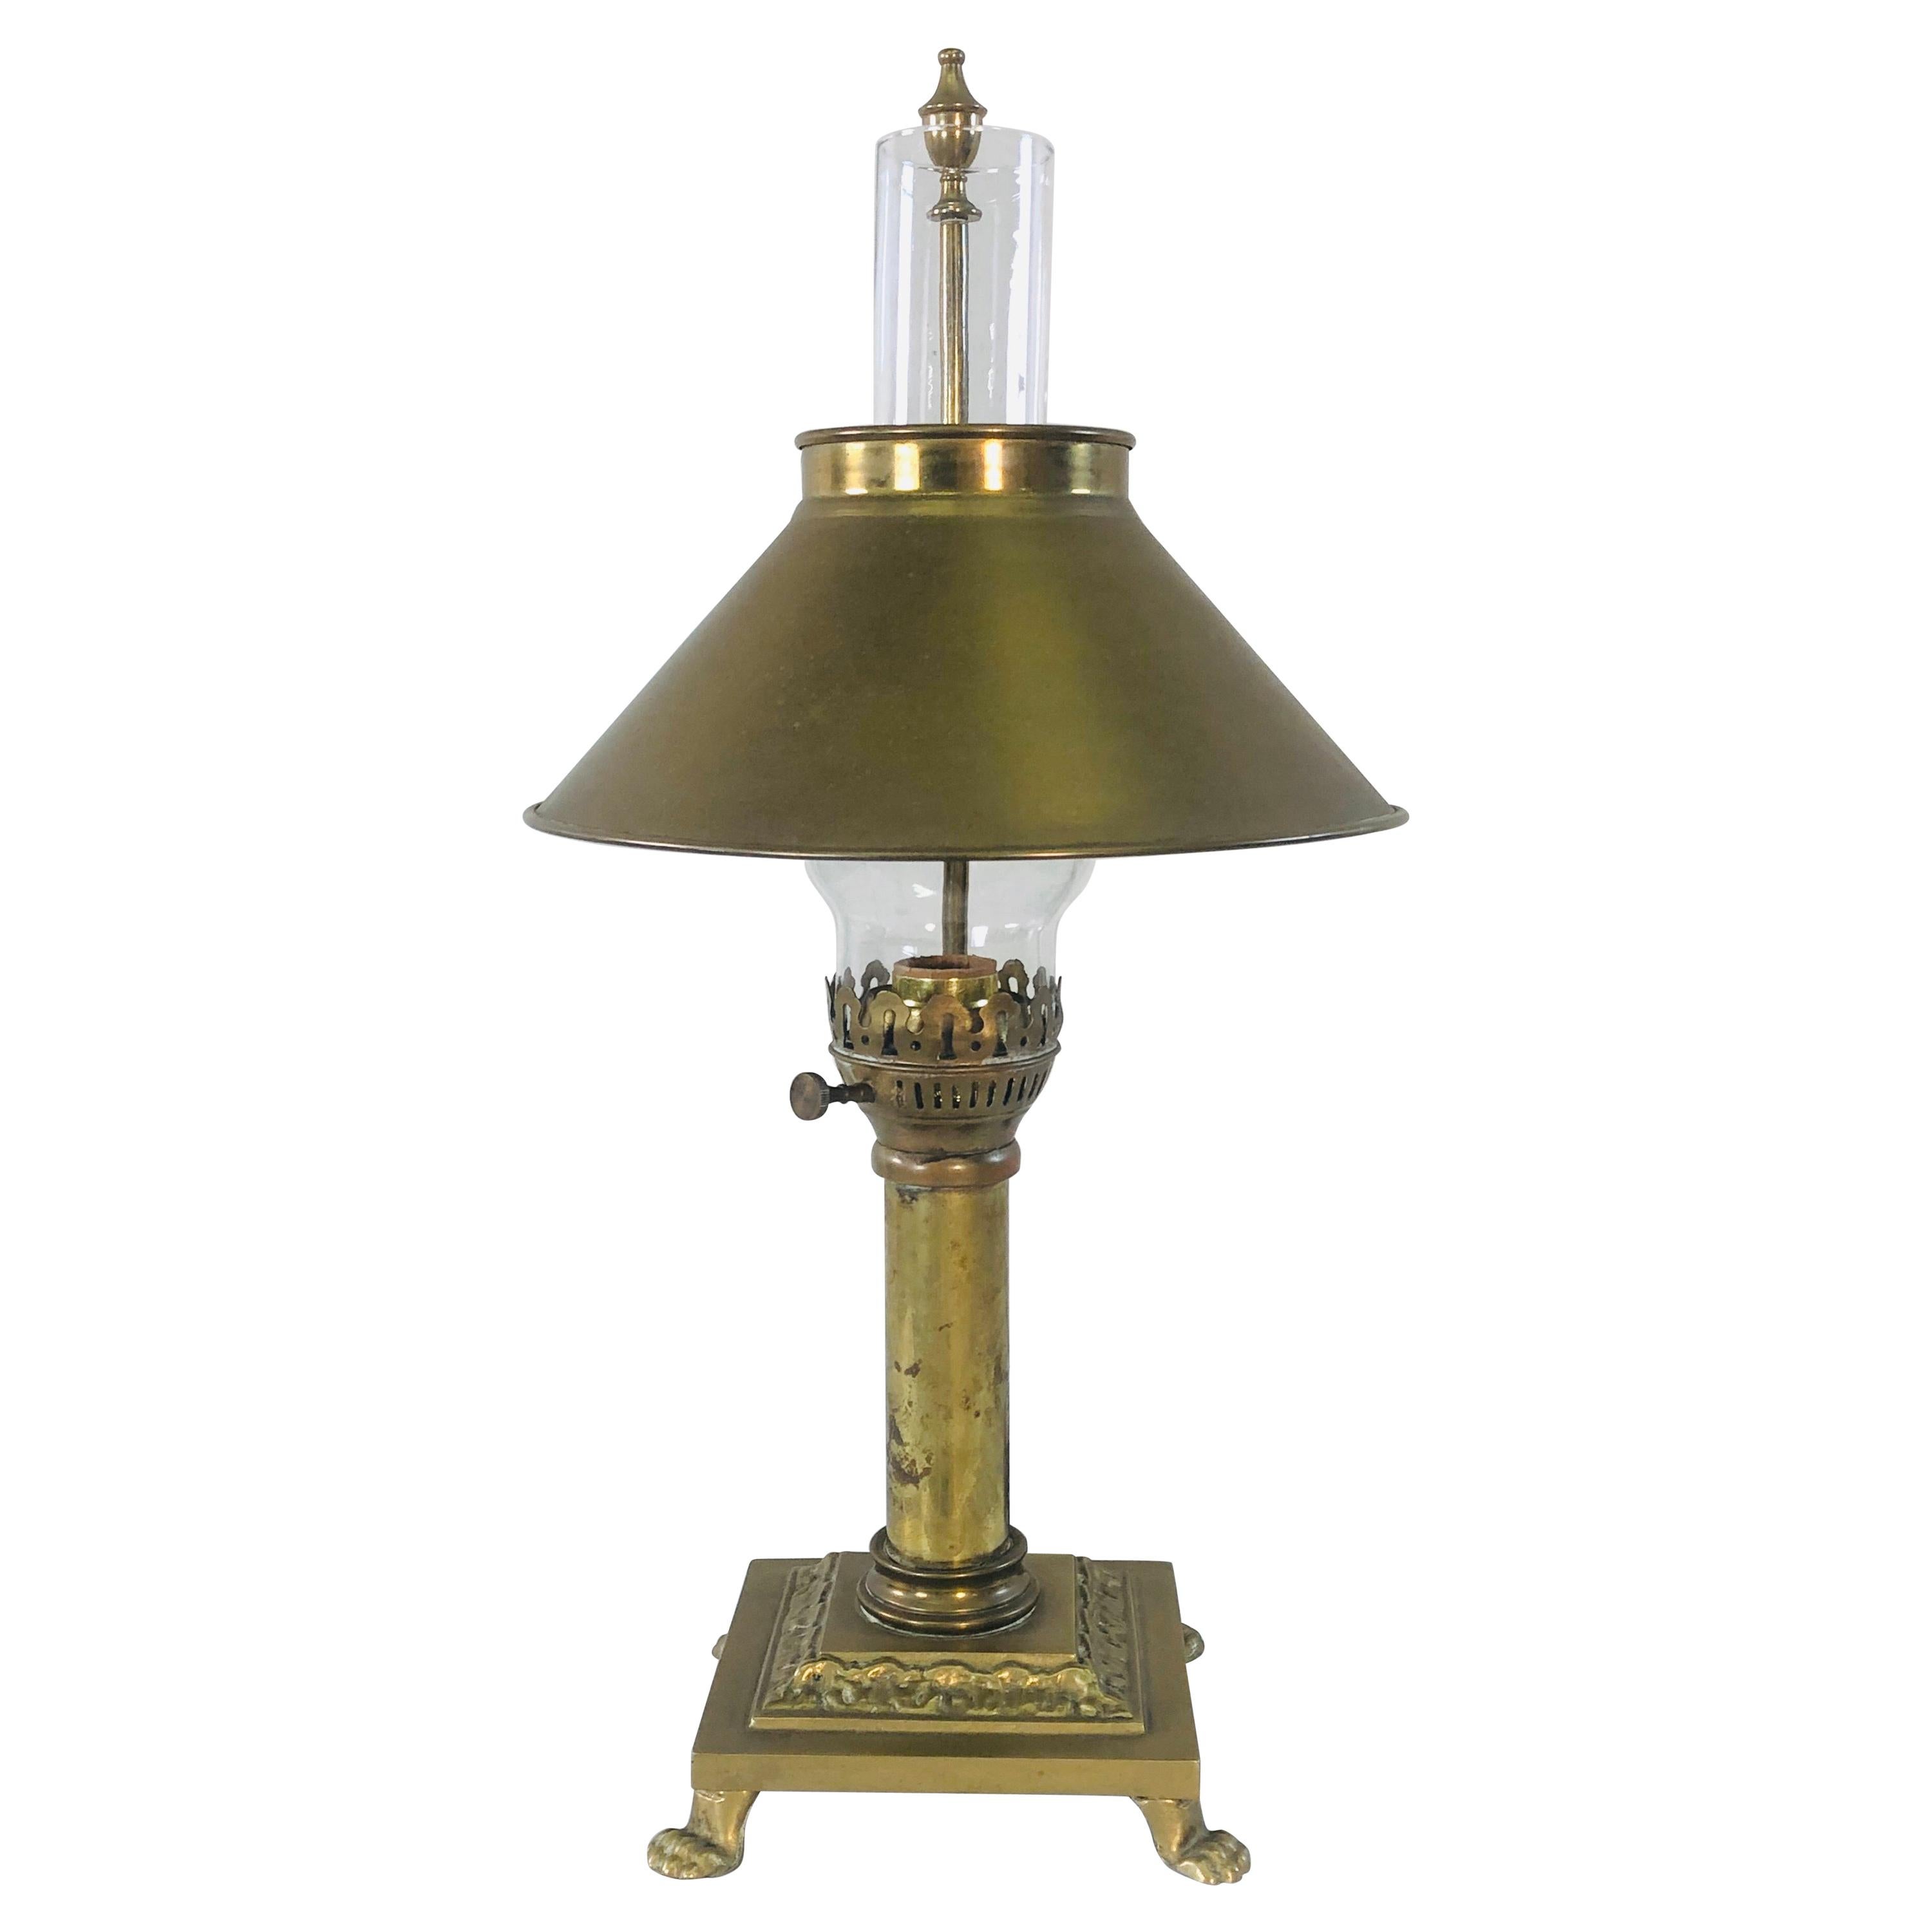 1950s Solid Brass Desk Lamp with Adjustable Shade